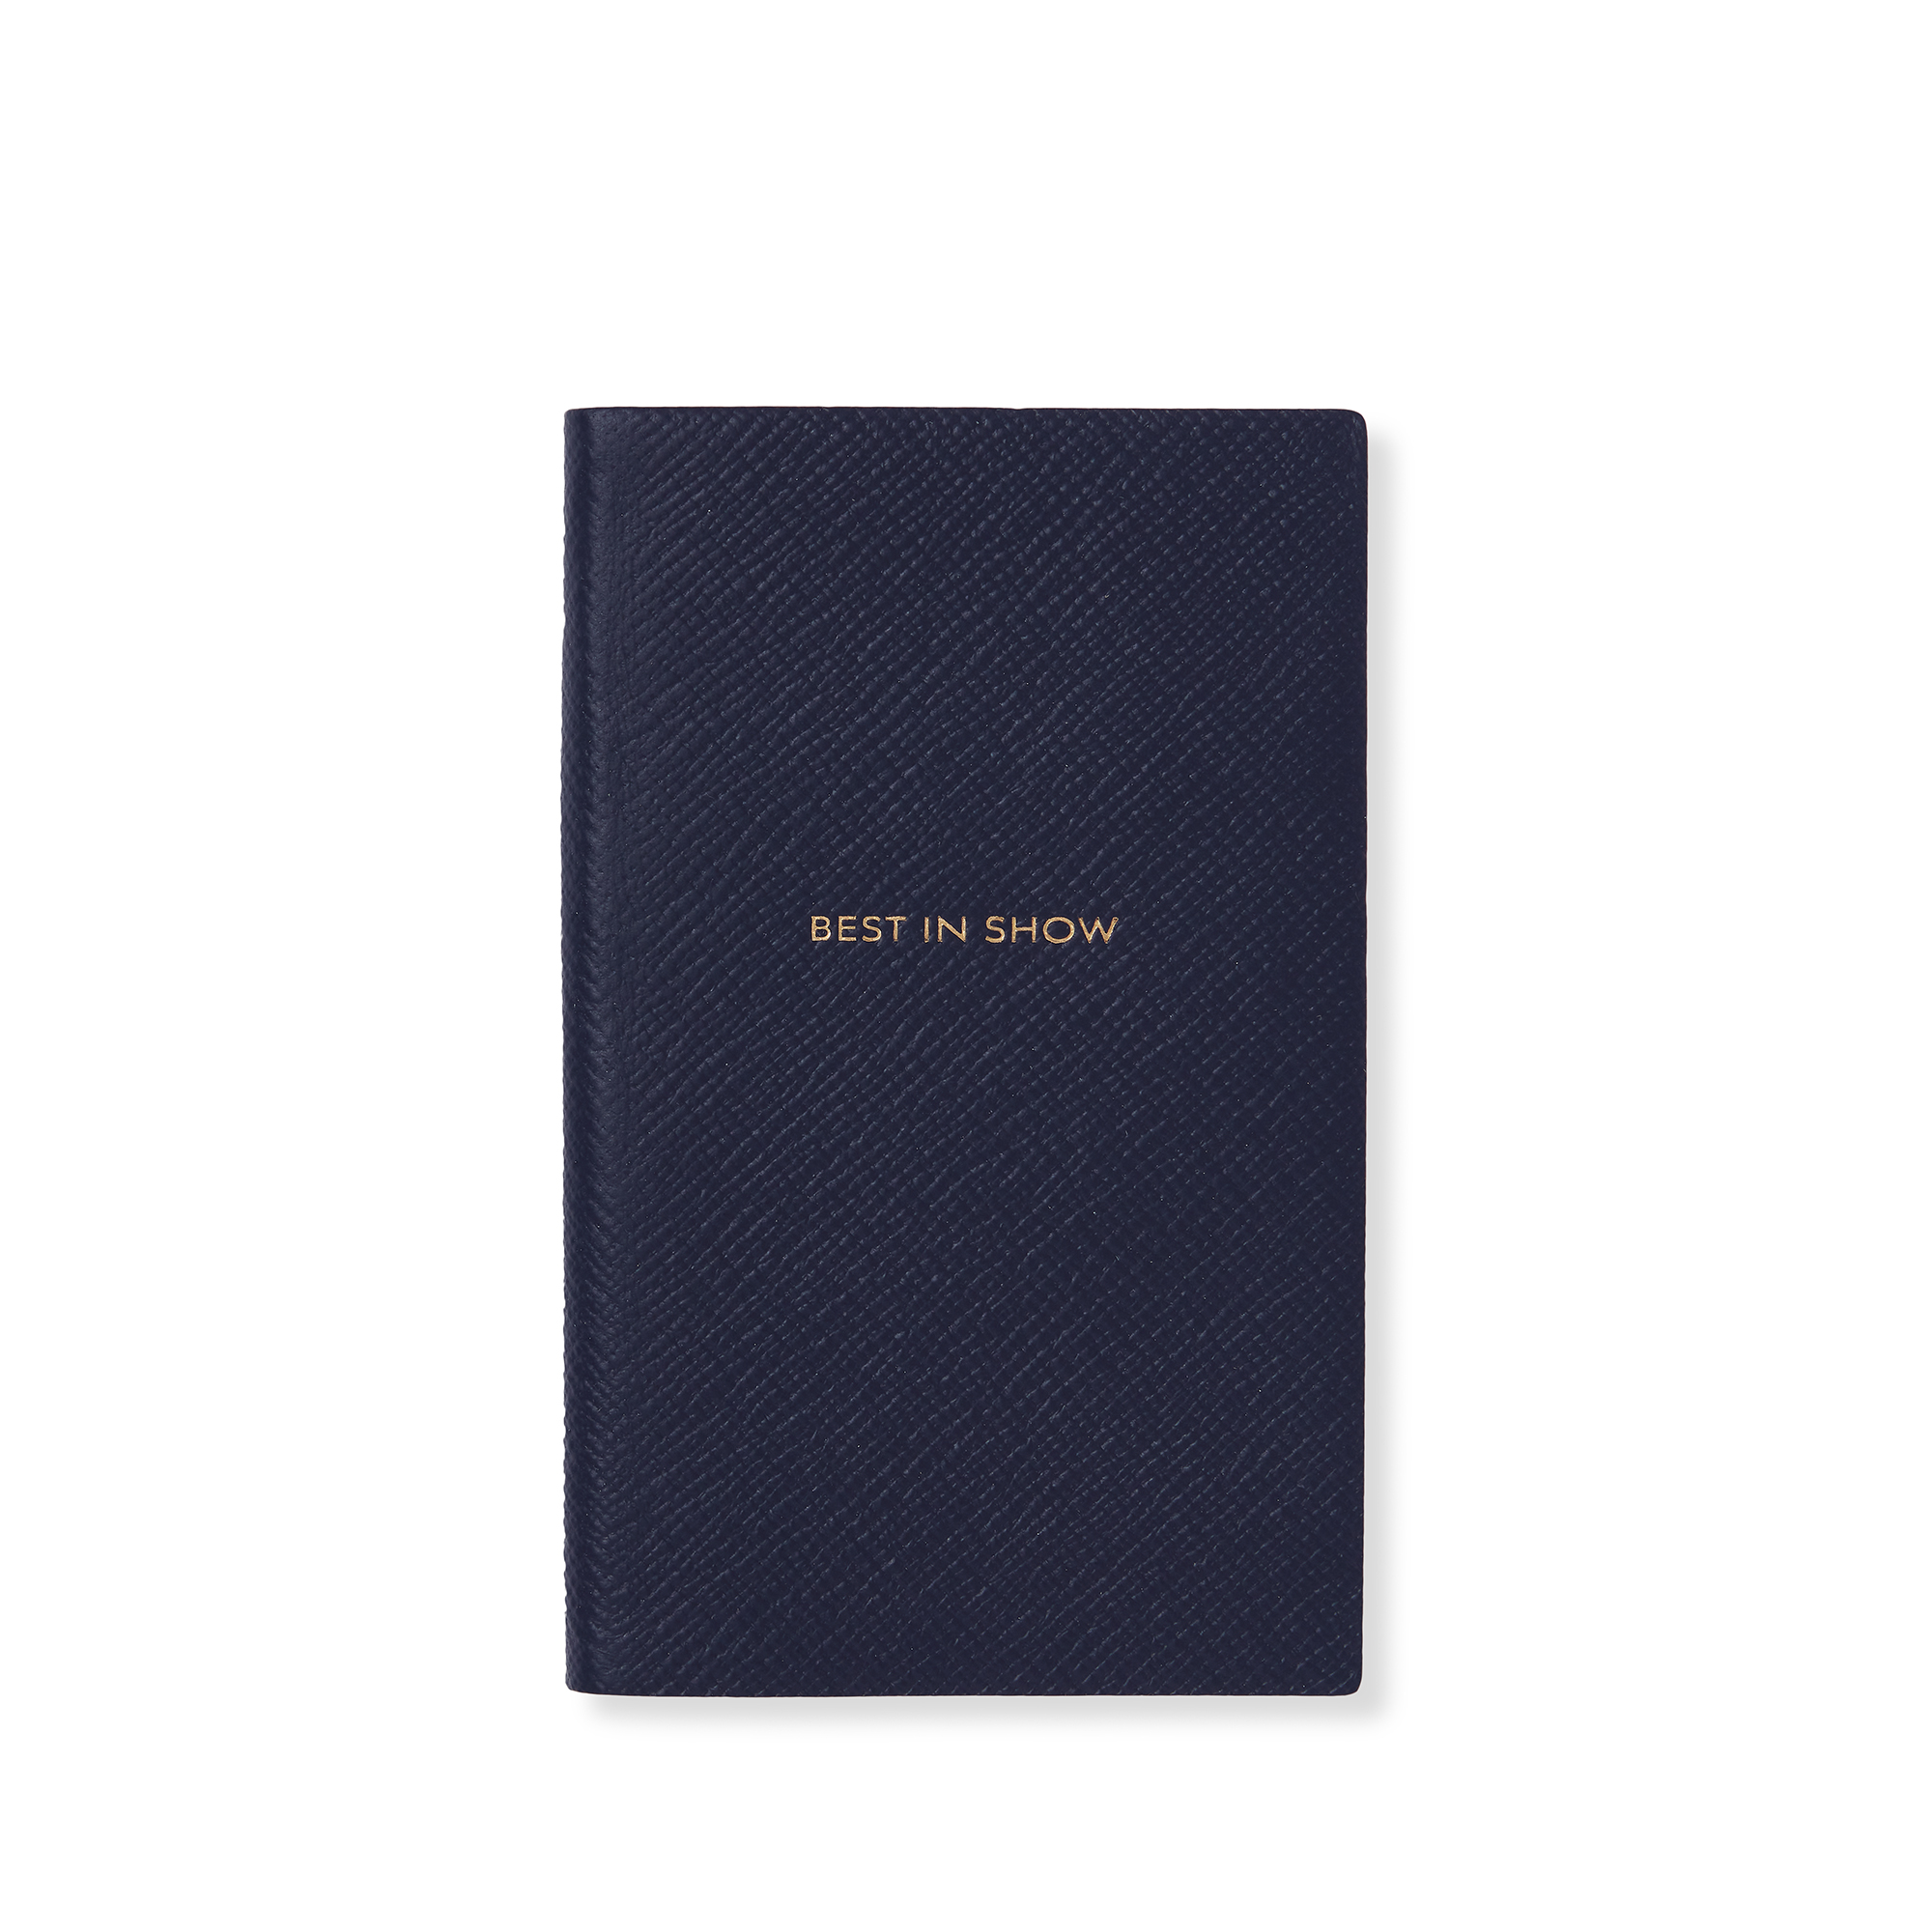 Smythson Best In Show Panama Notebook In Navy